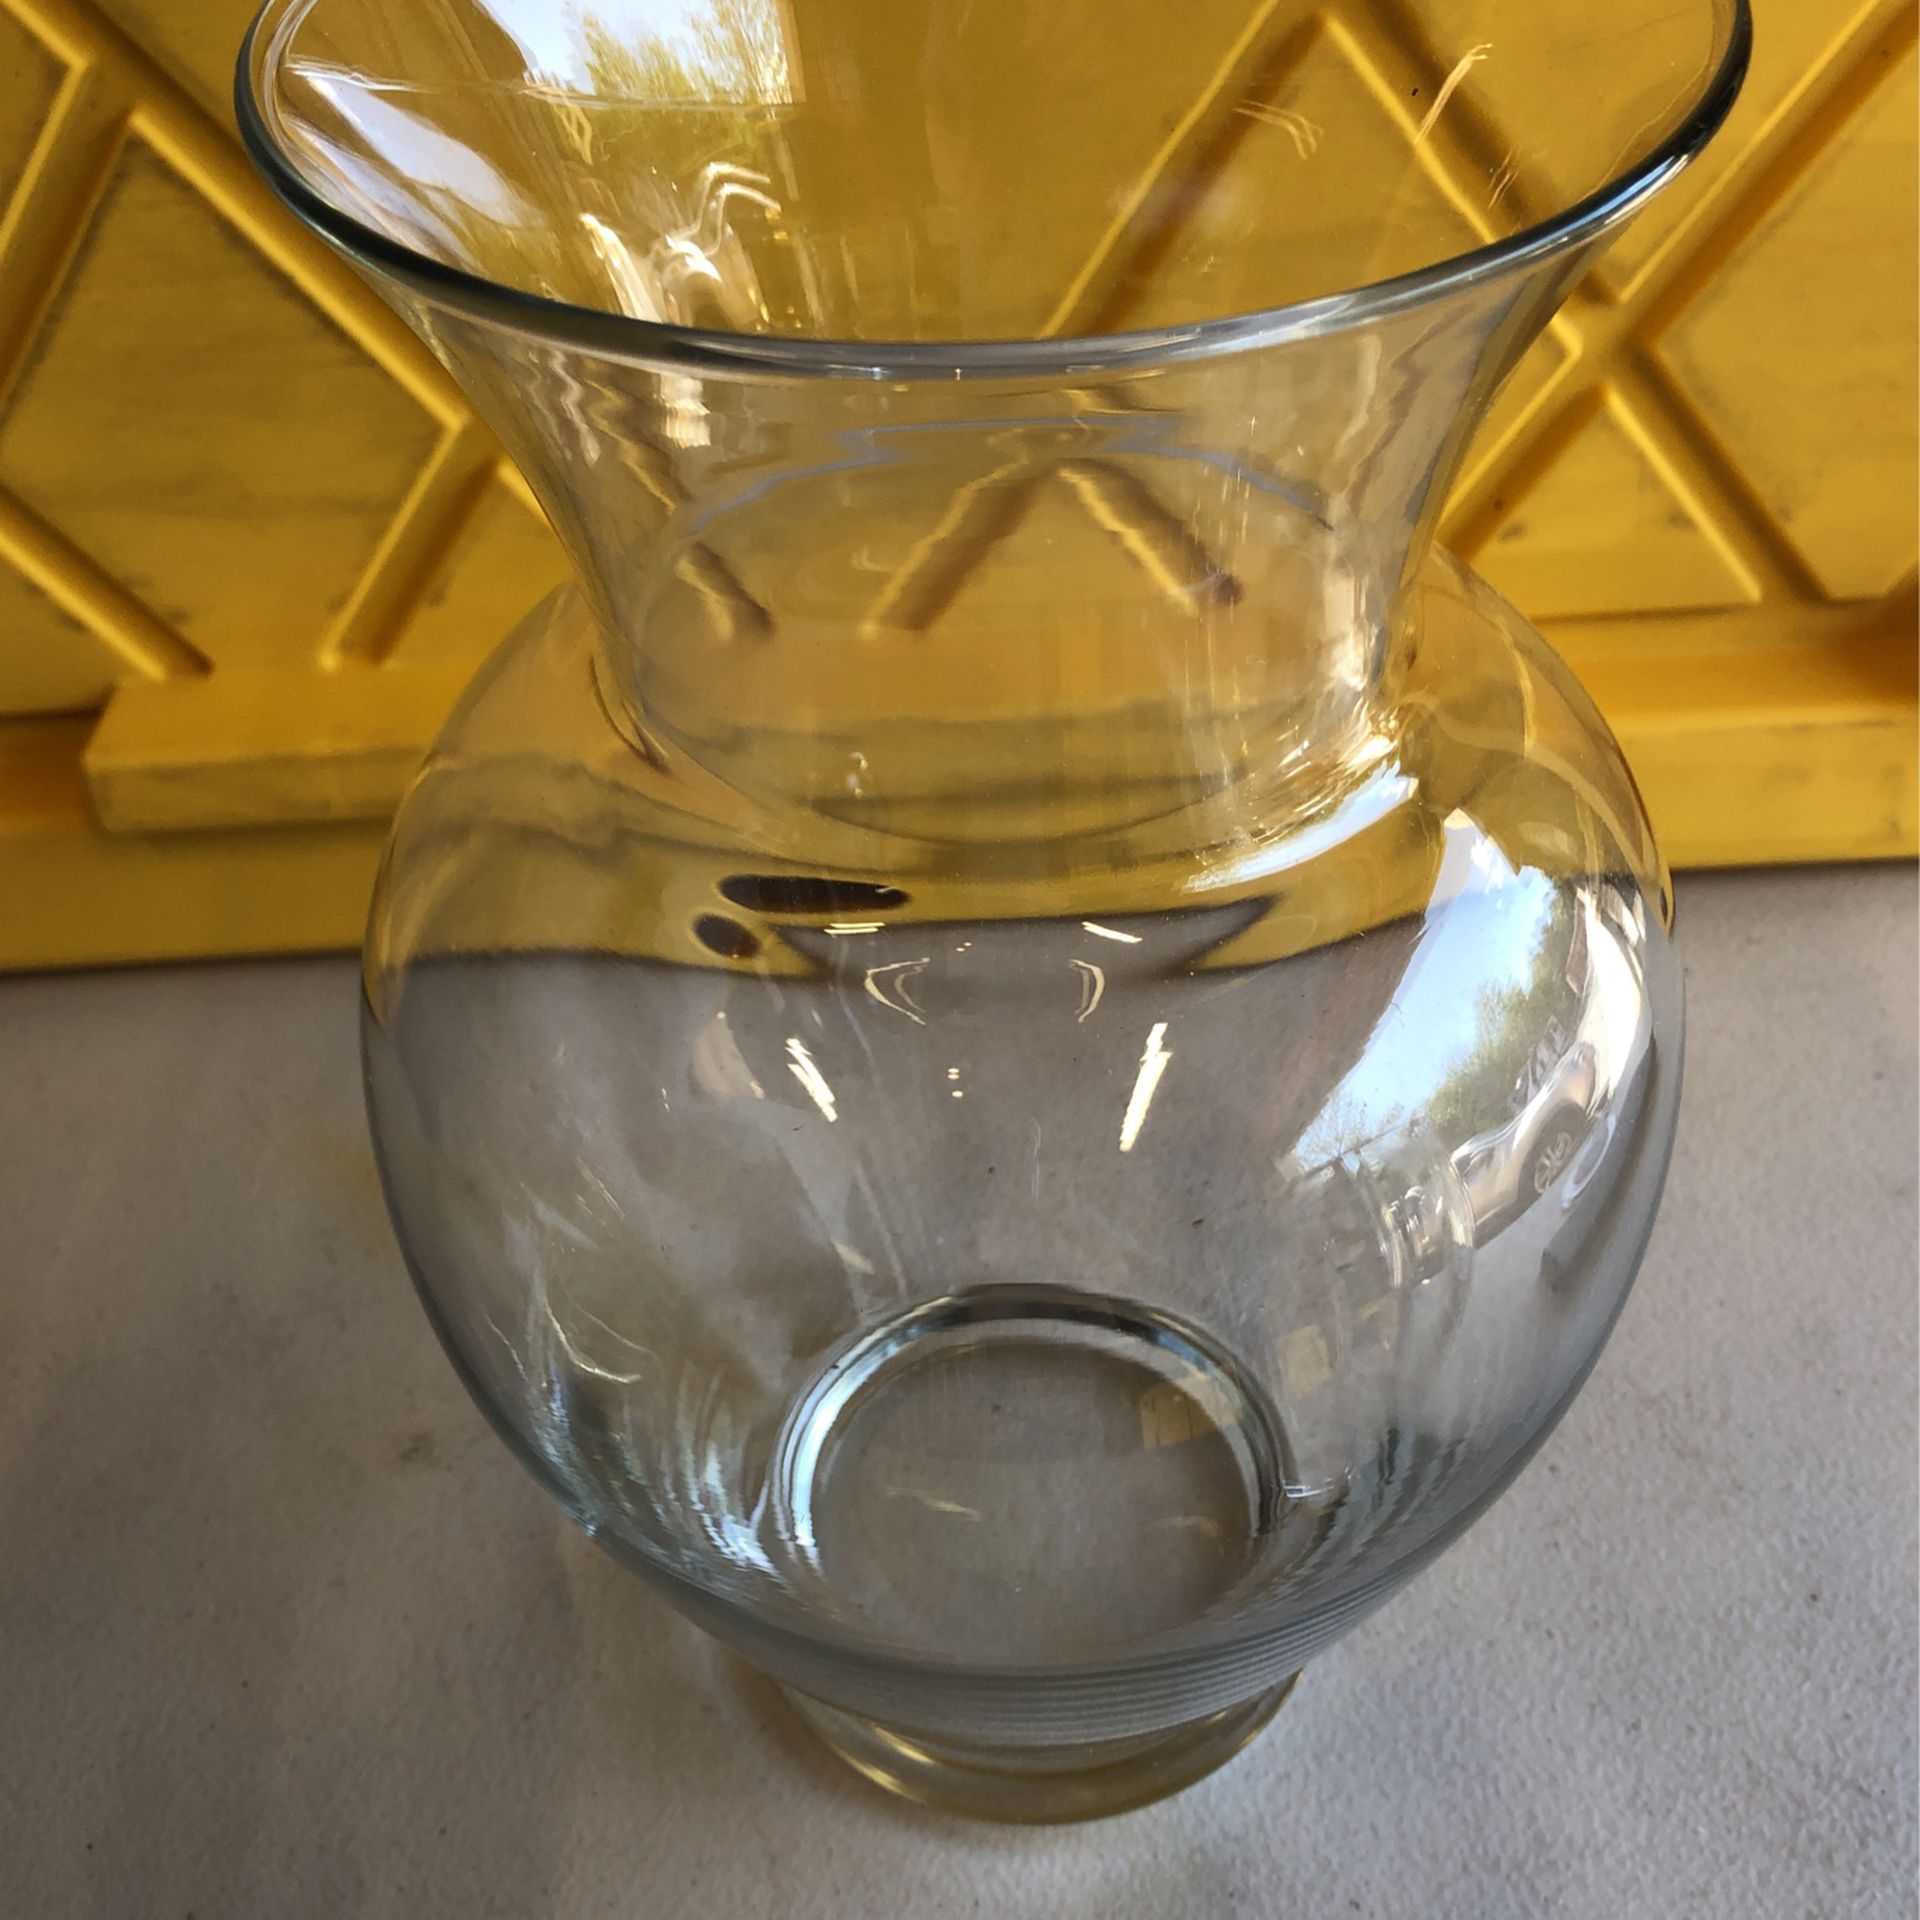 Vases 3         11” And 8”    (1 Lead Crystal)